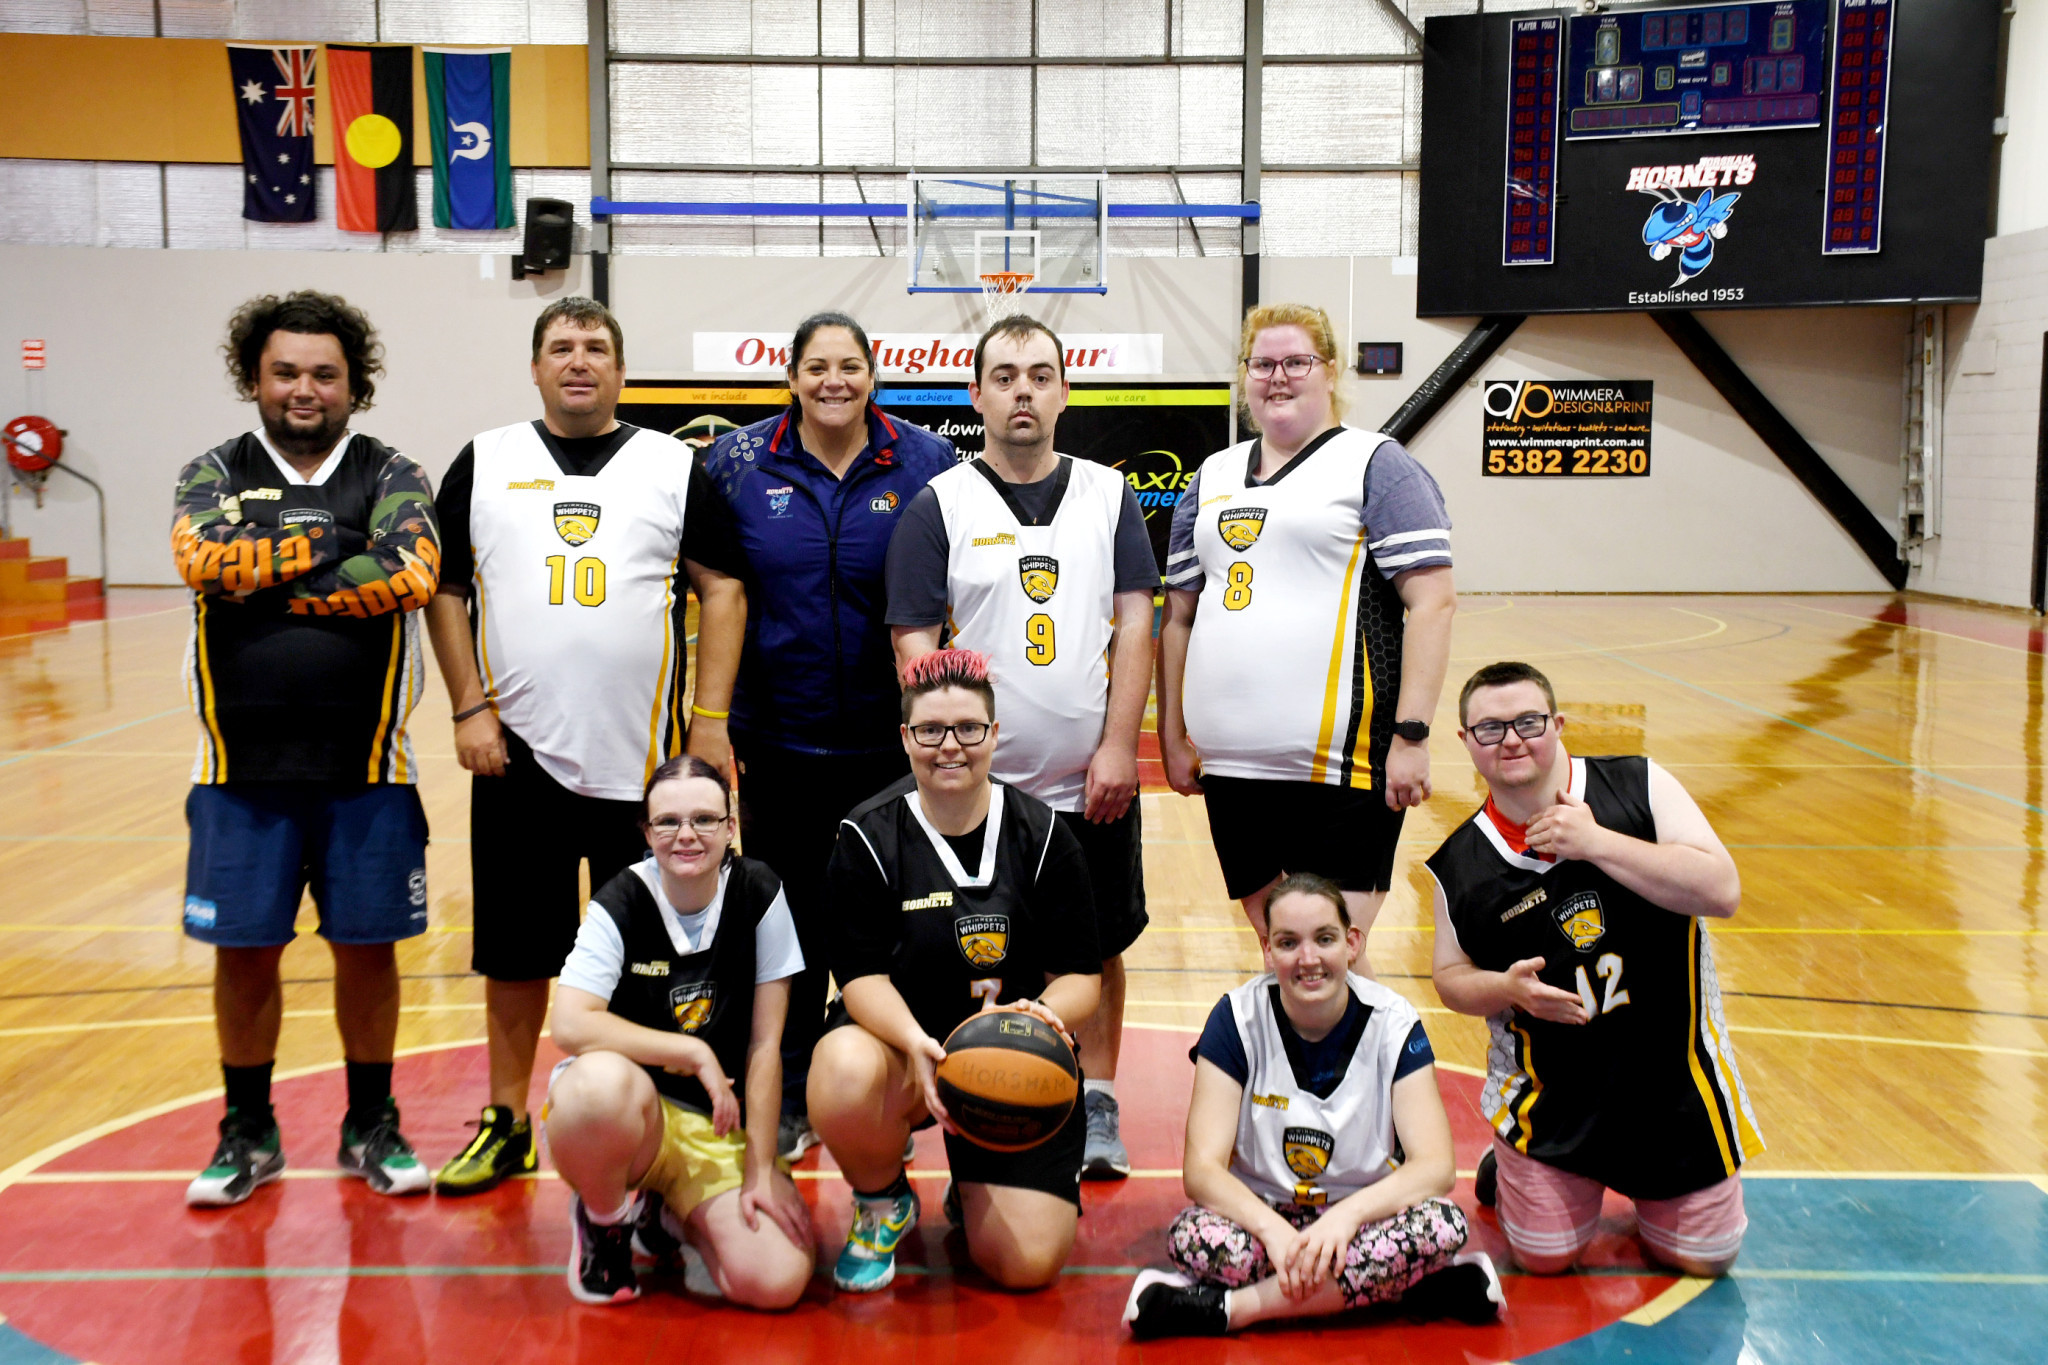 Access all-abilities basketball program a hit - feature photo